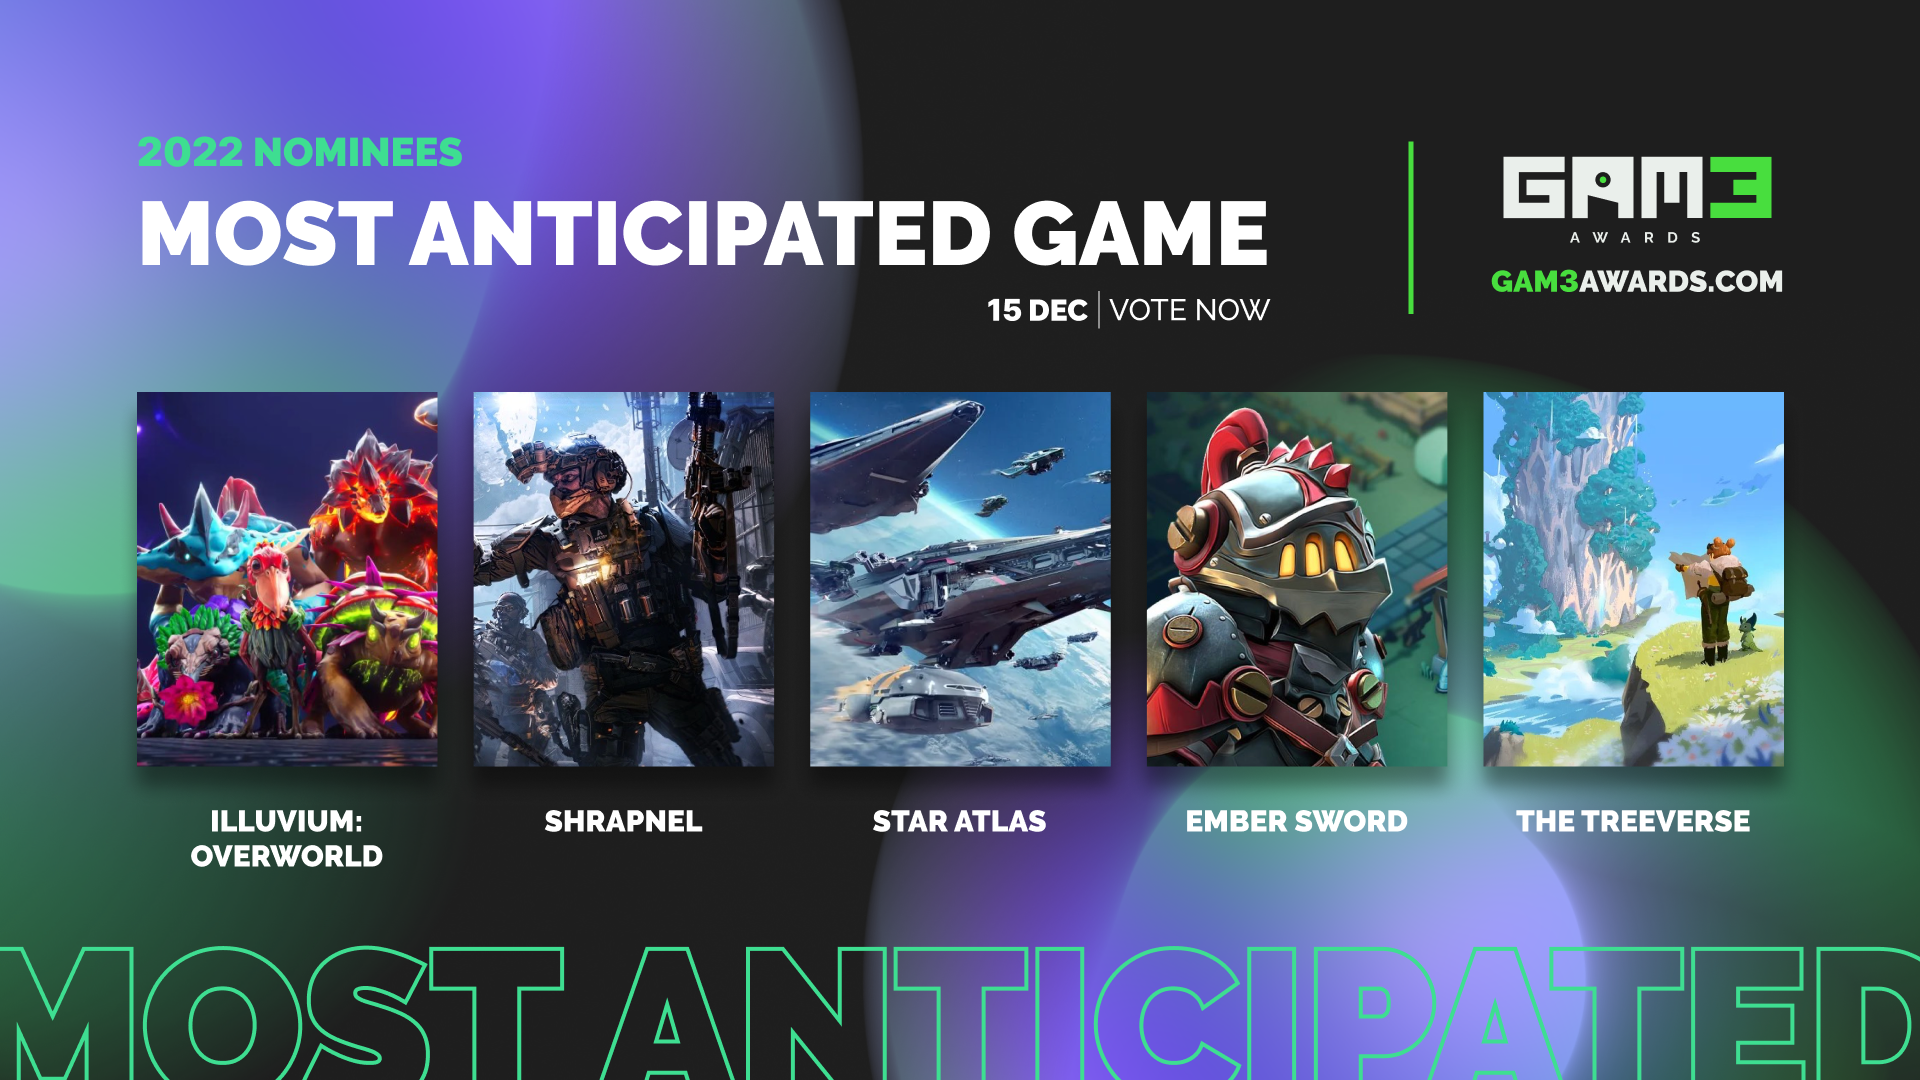 most anticipated game_category.png